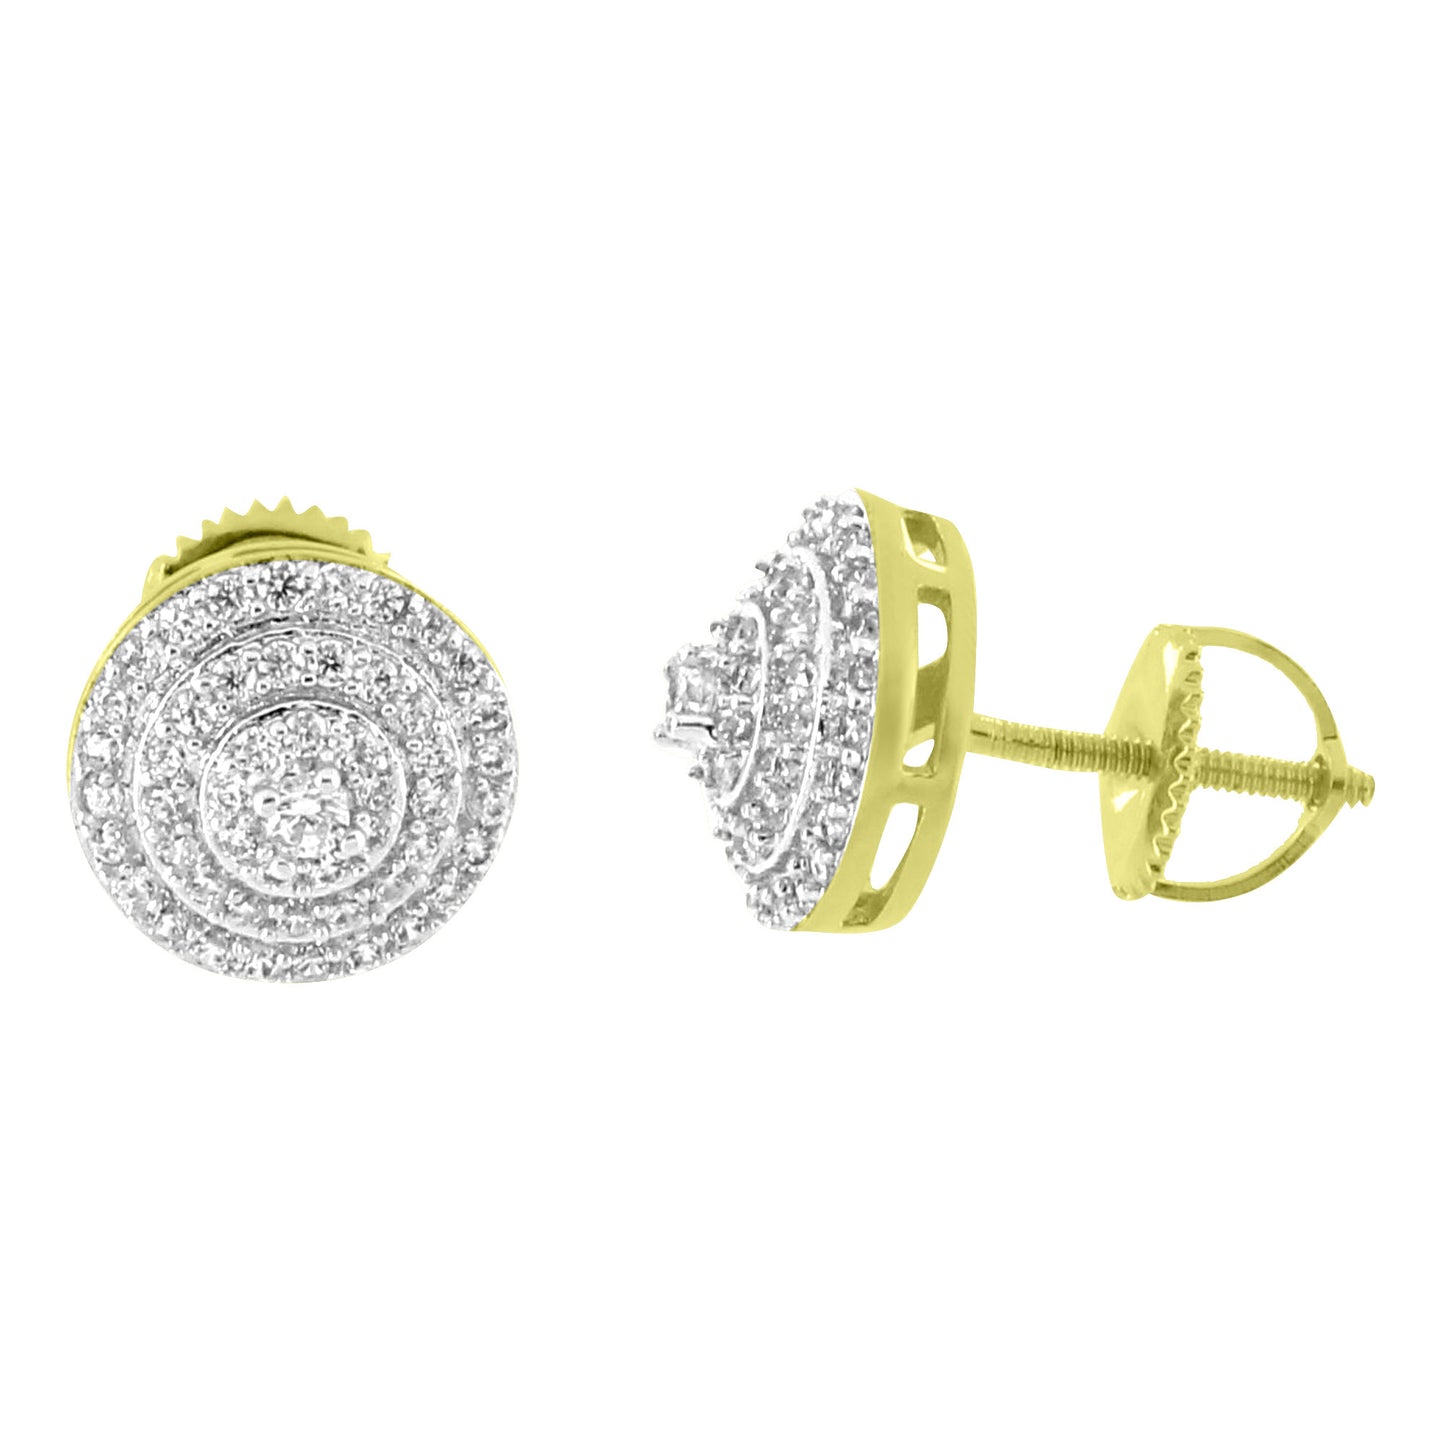 Solitaire Prong Set Earrings Round 14k Gold Finish Simulated Diamonds Screw Back Studs